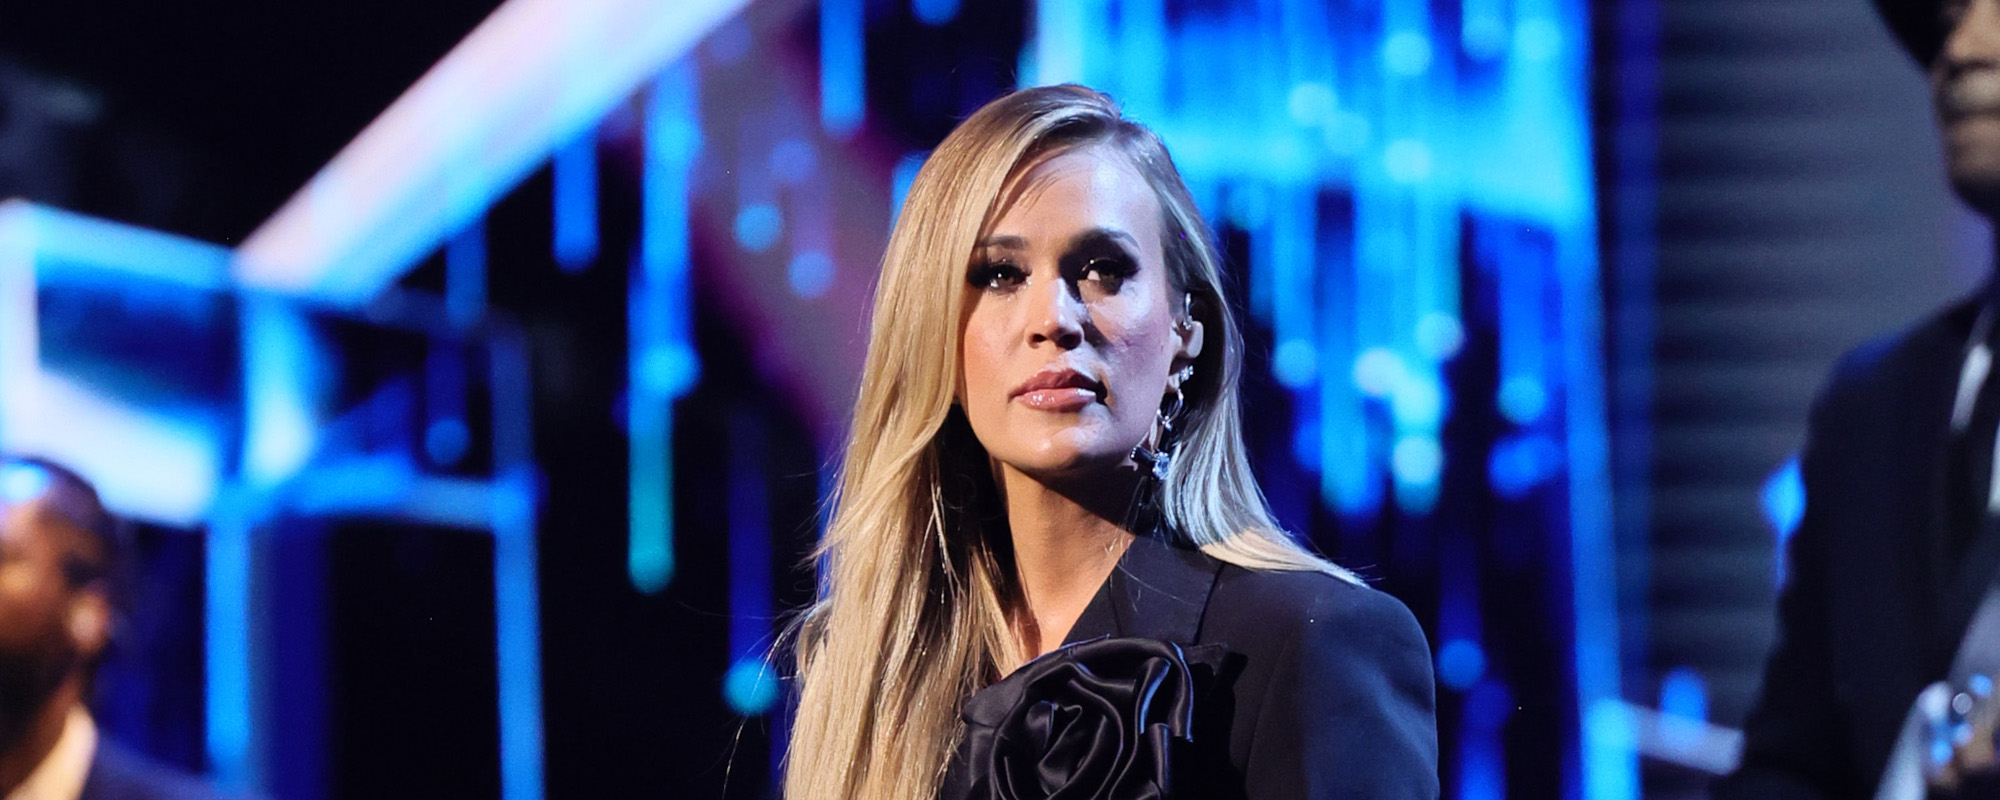 Go Country 105 - Carrie Underwood is honored to be nominated for CMA  Entertainer of the Year